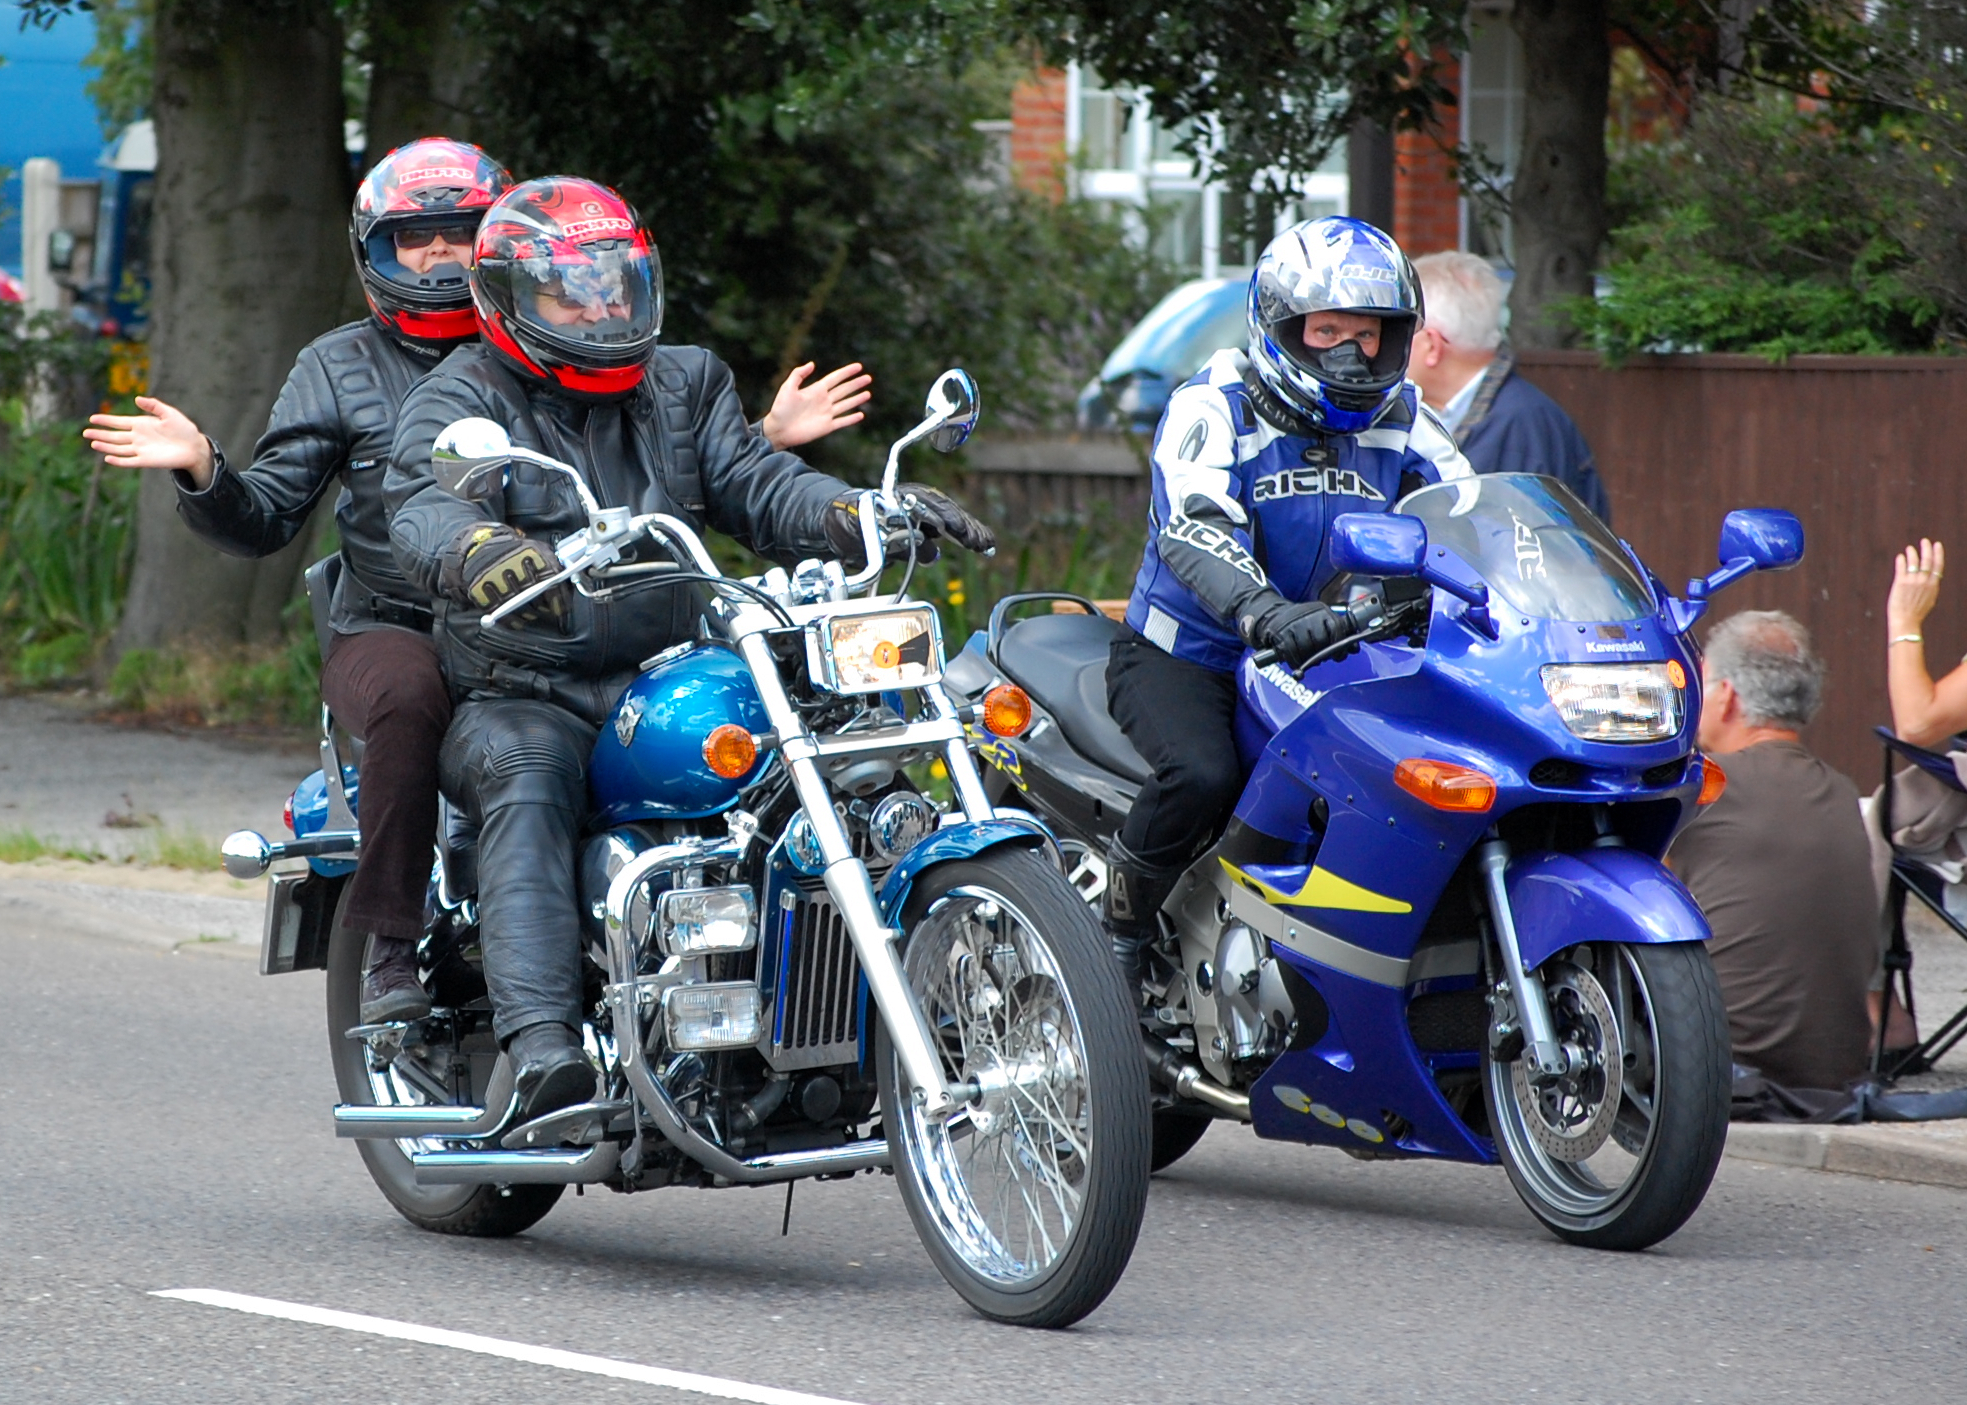 two people riding on the back of two motorcycles